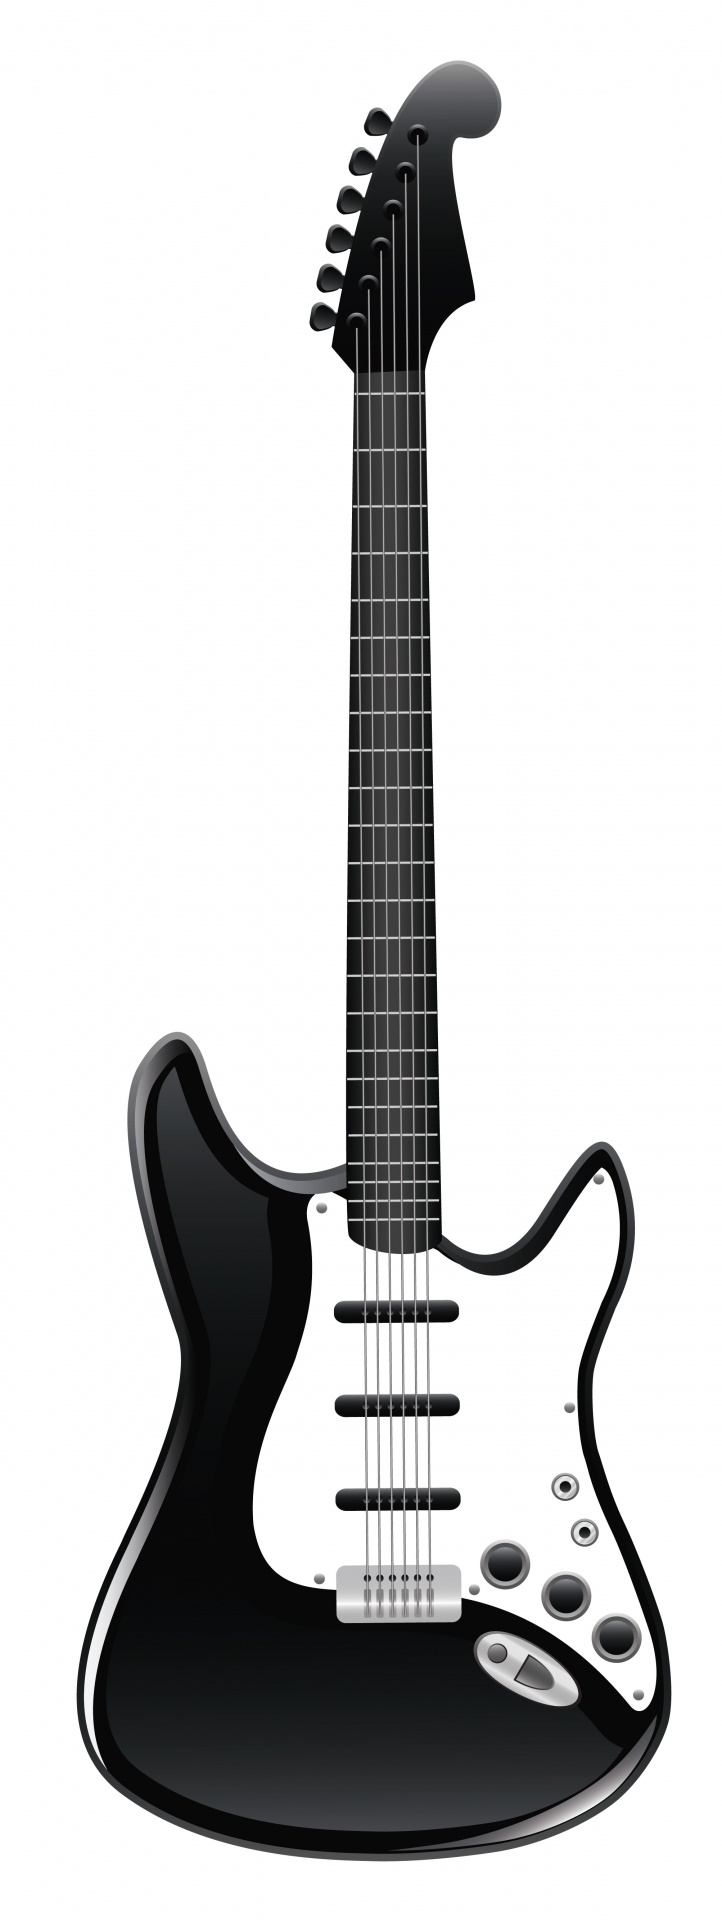 Animated Electric Guitar